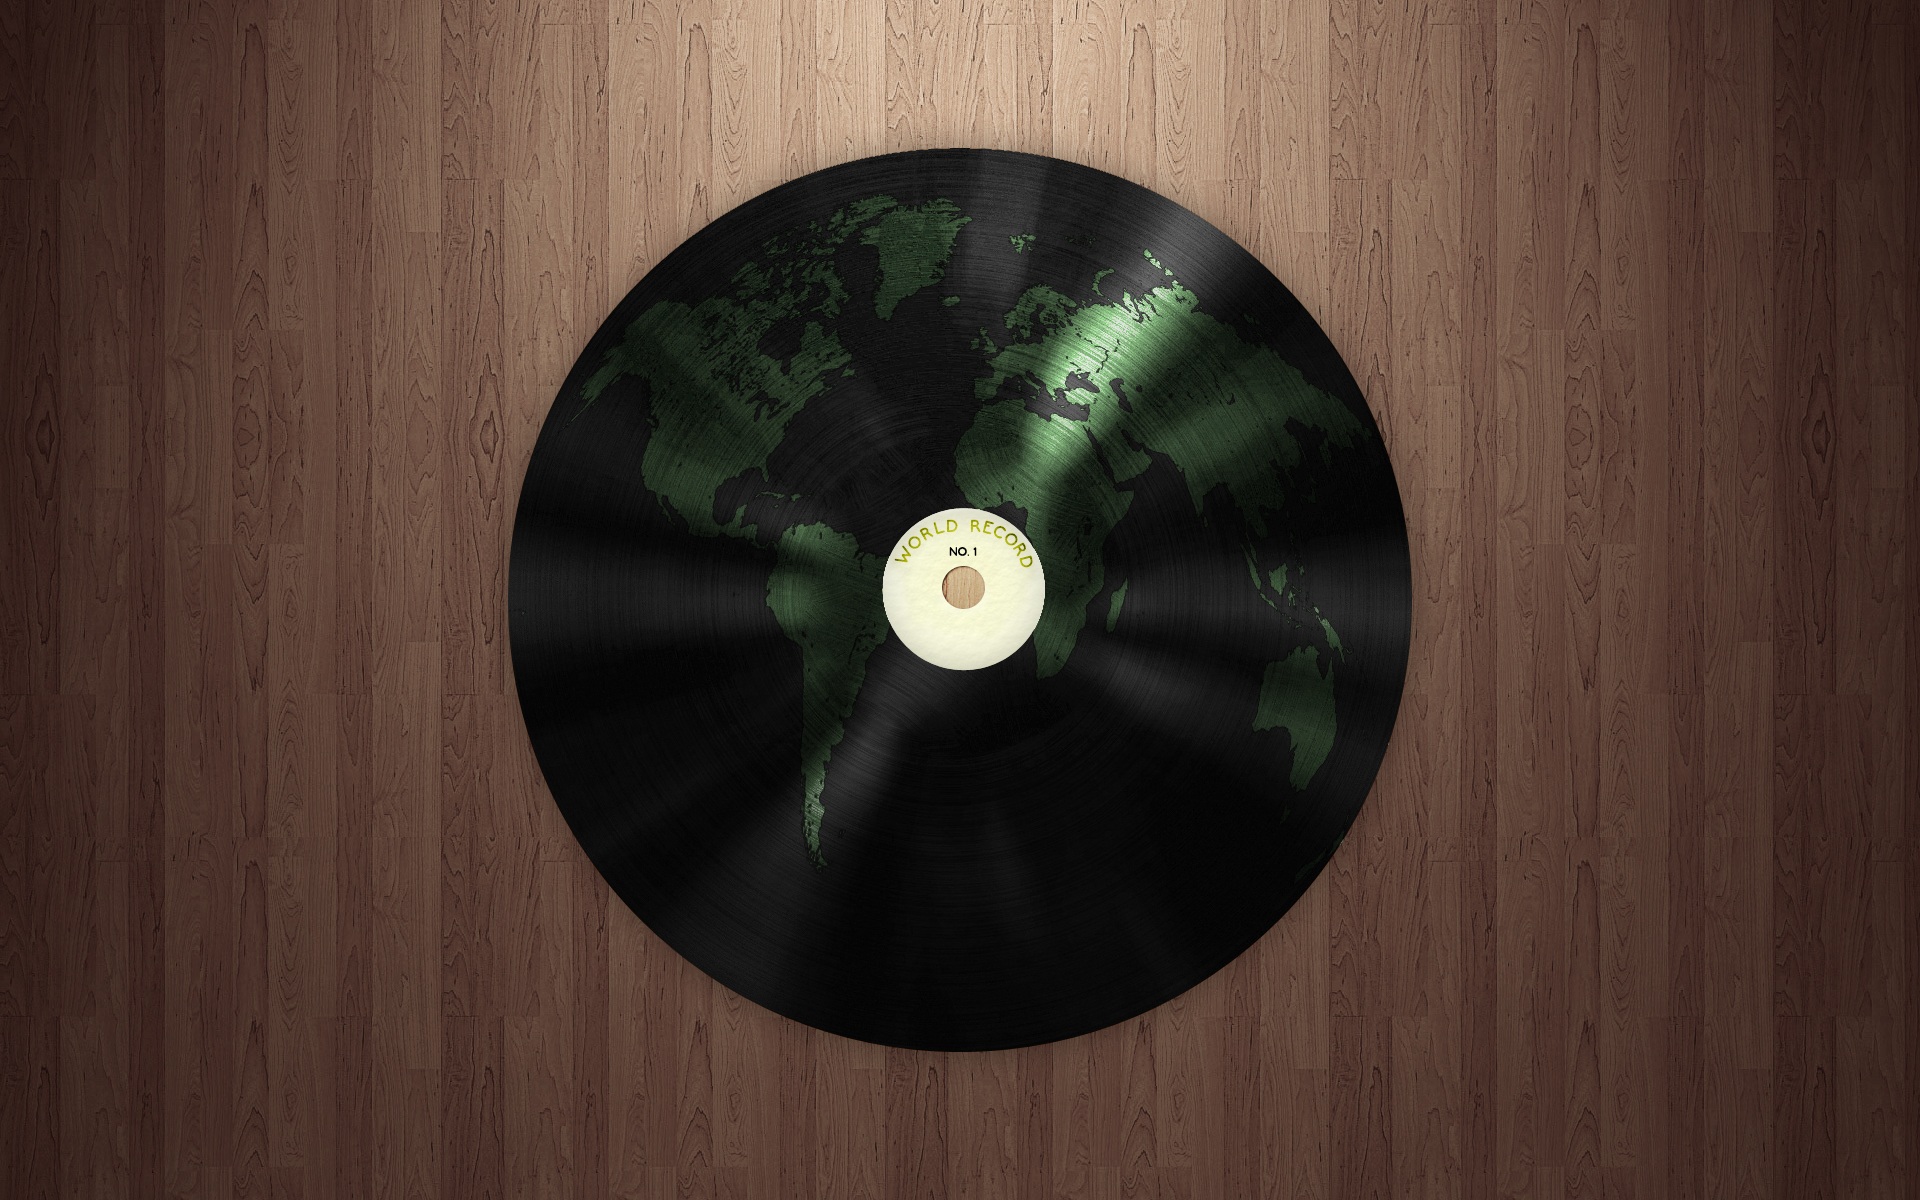 Vinyl 4K wallpapers for your desktop or mobile screen free and easy to